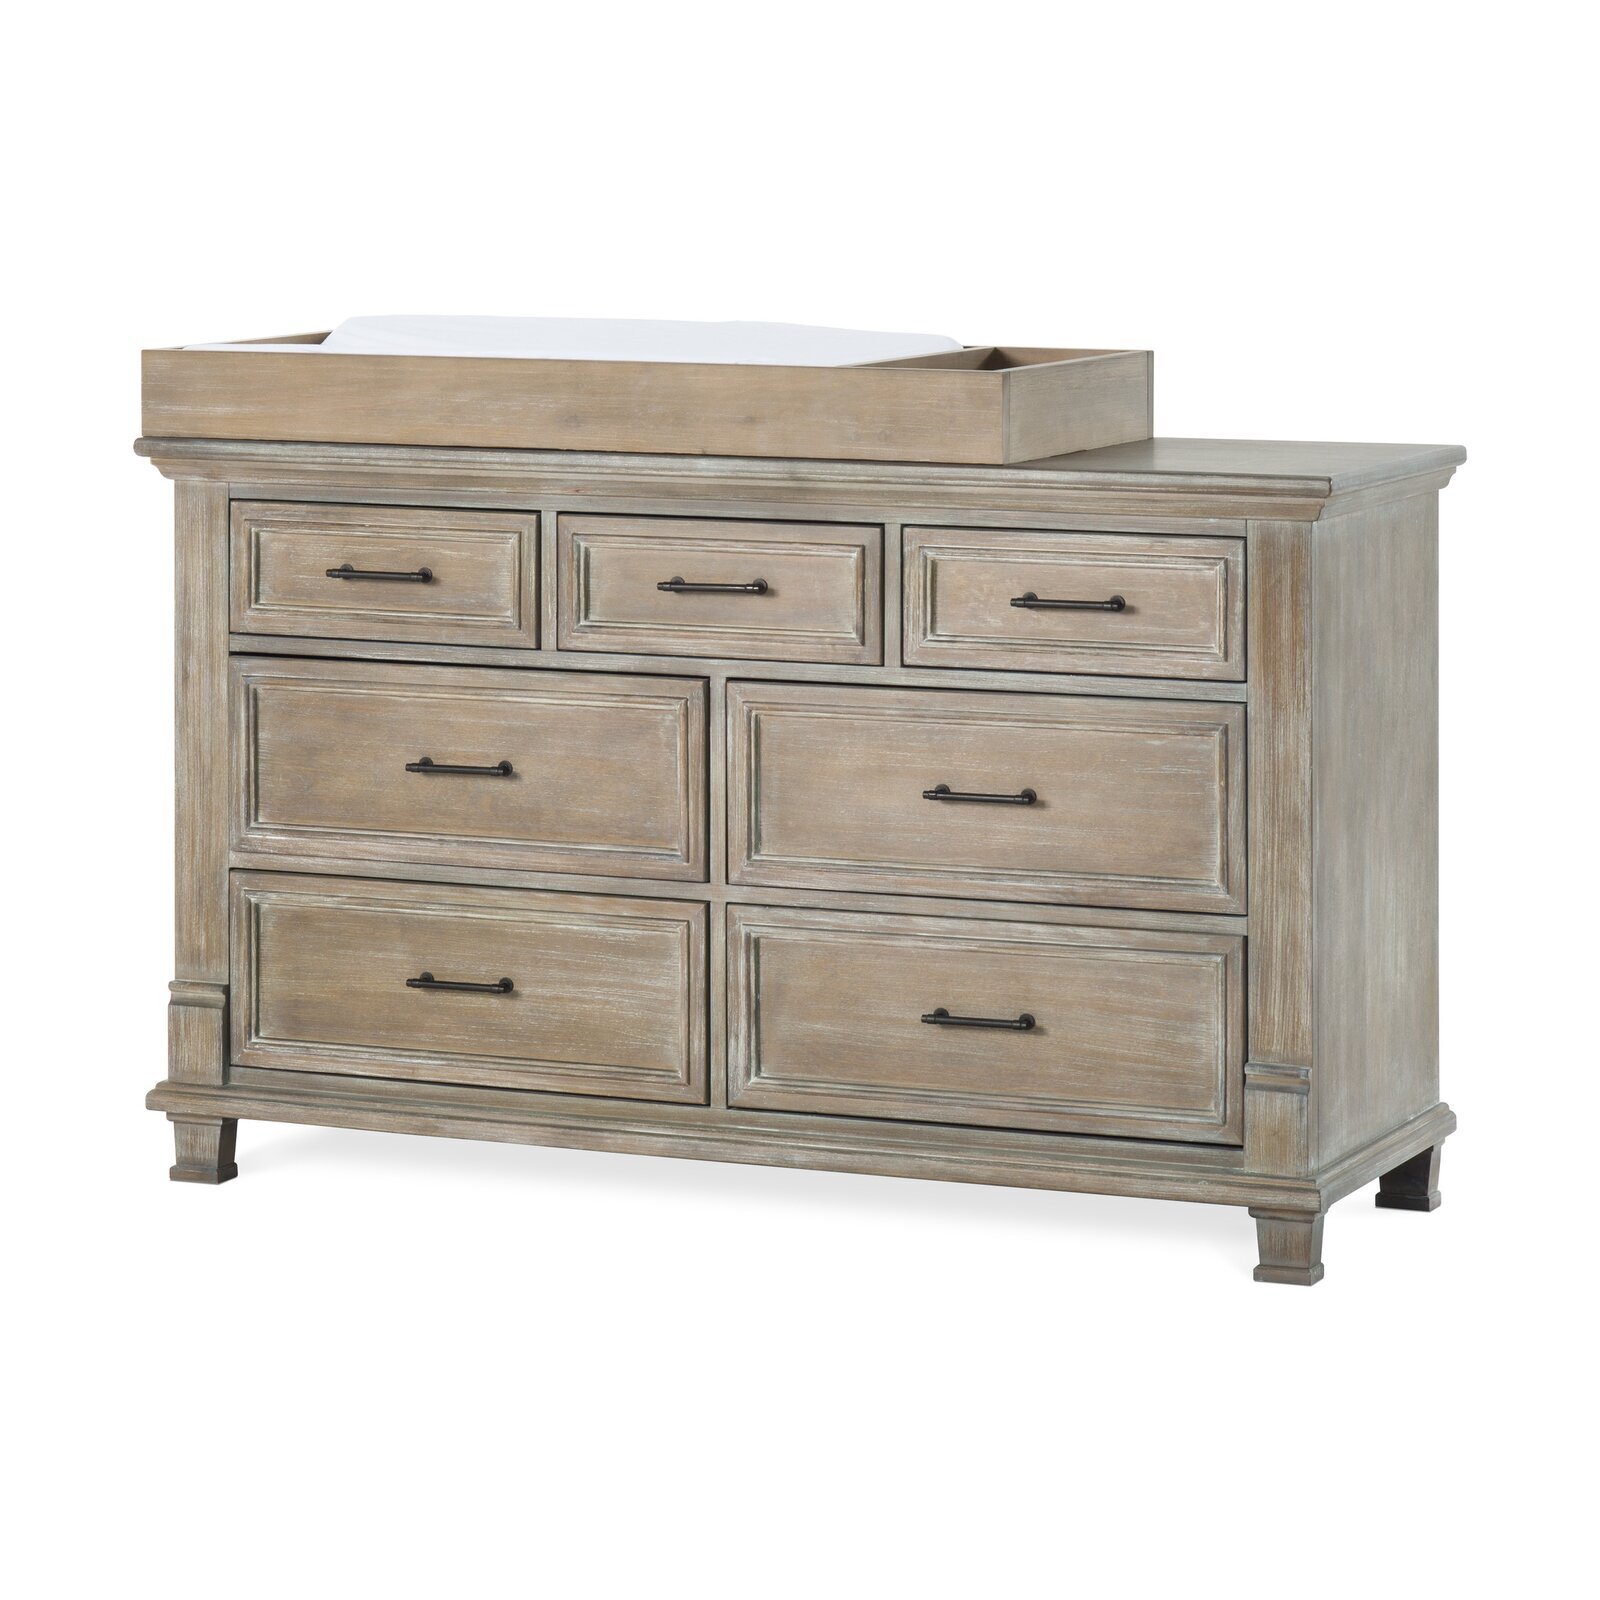 Modern Distressed Wooden Change Table With Drawers